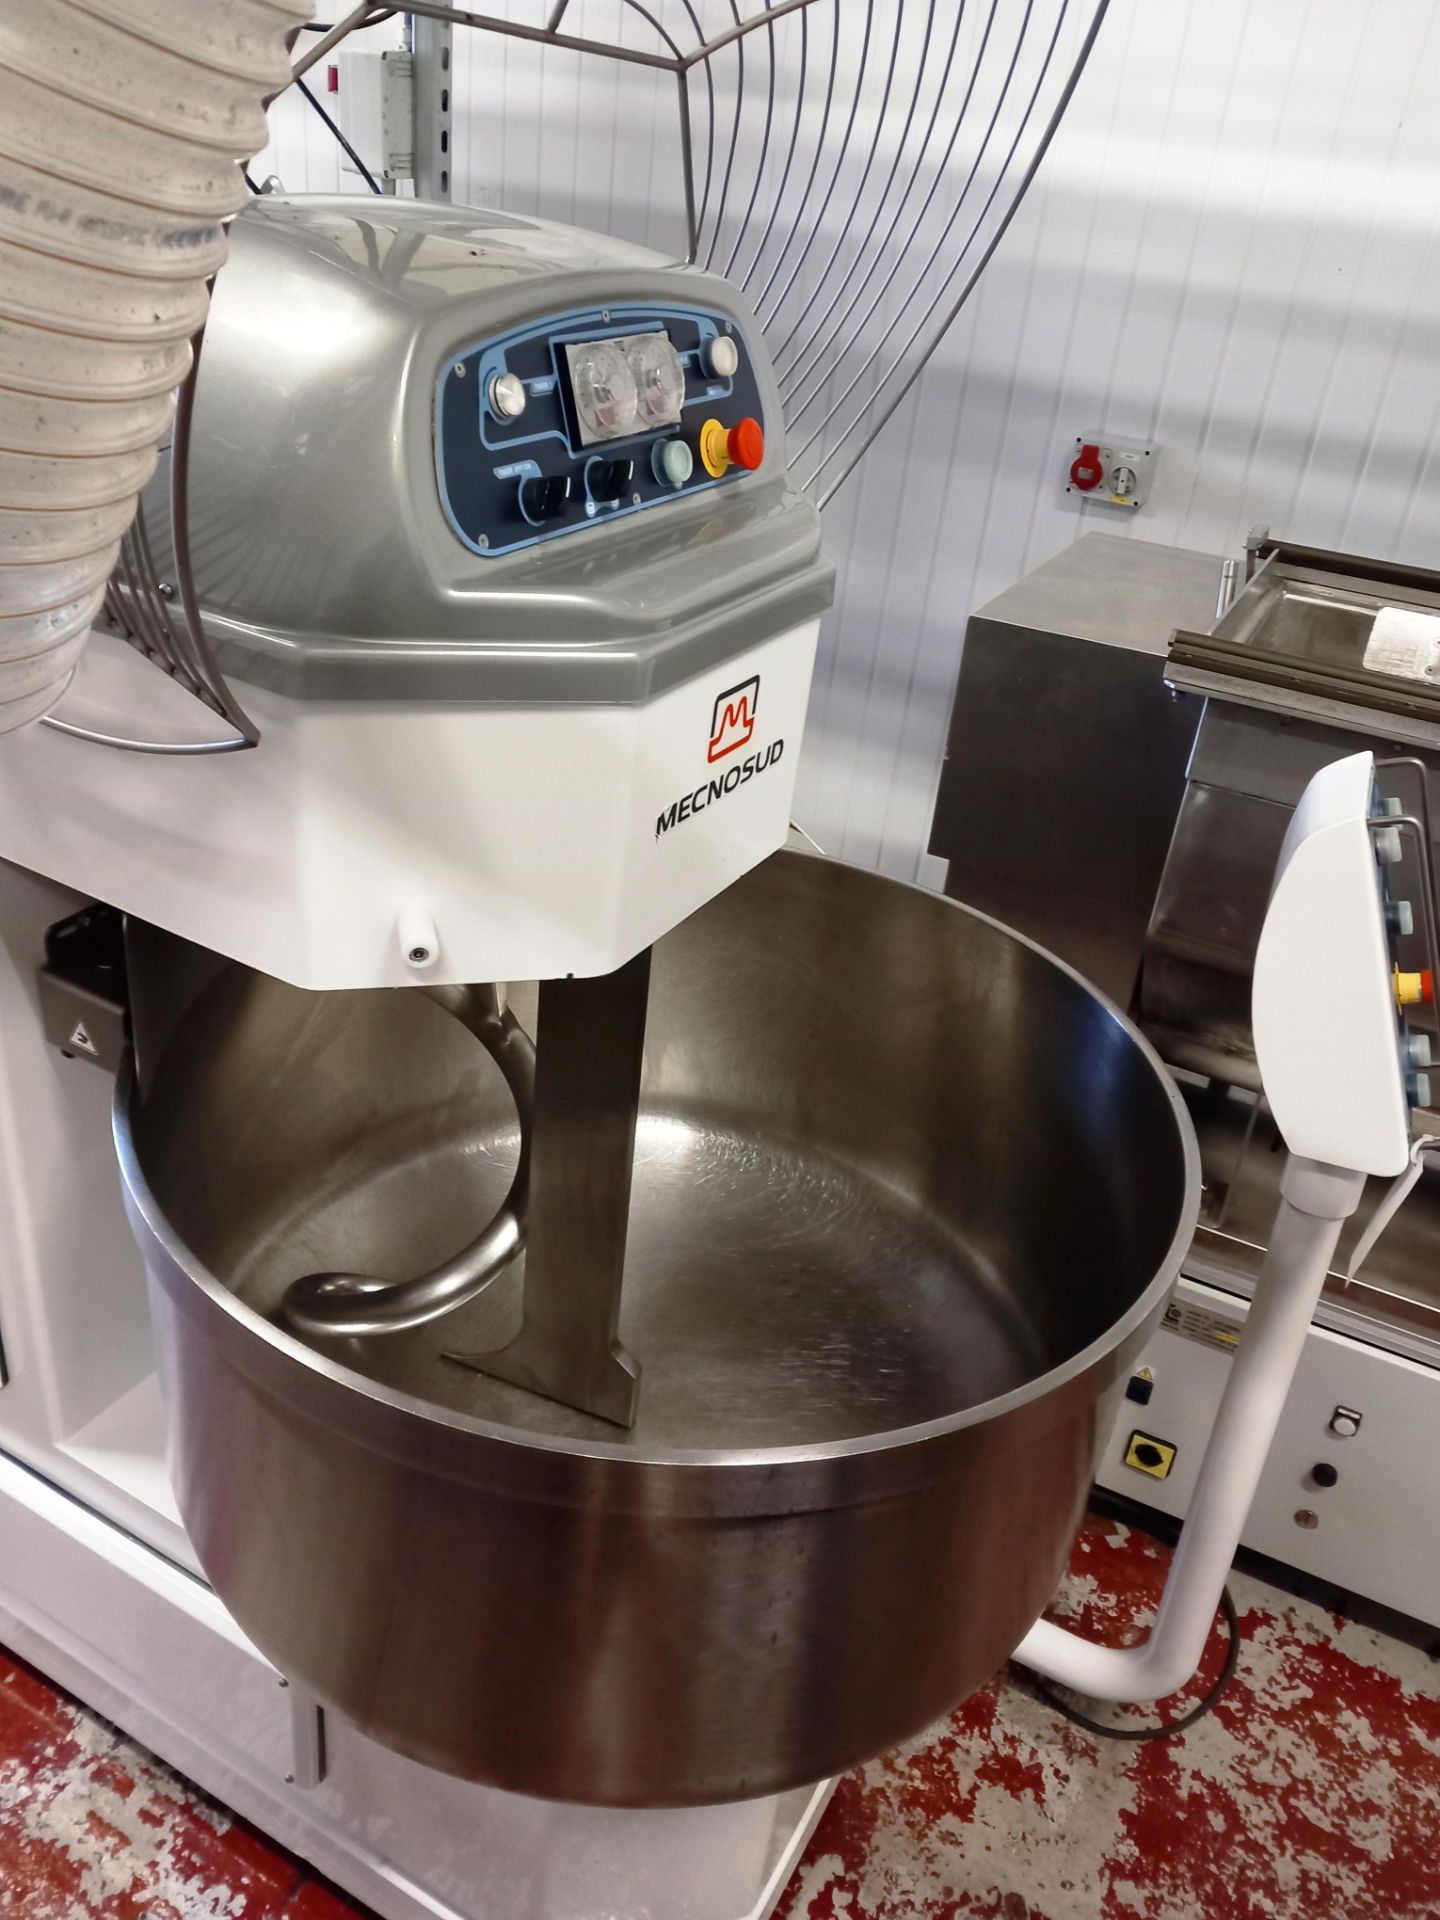 Mecnosud SPRB200 Auto Tipping 200 ltr Spiral Mixer (2015) 3 Phase - Image 3 of 6